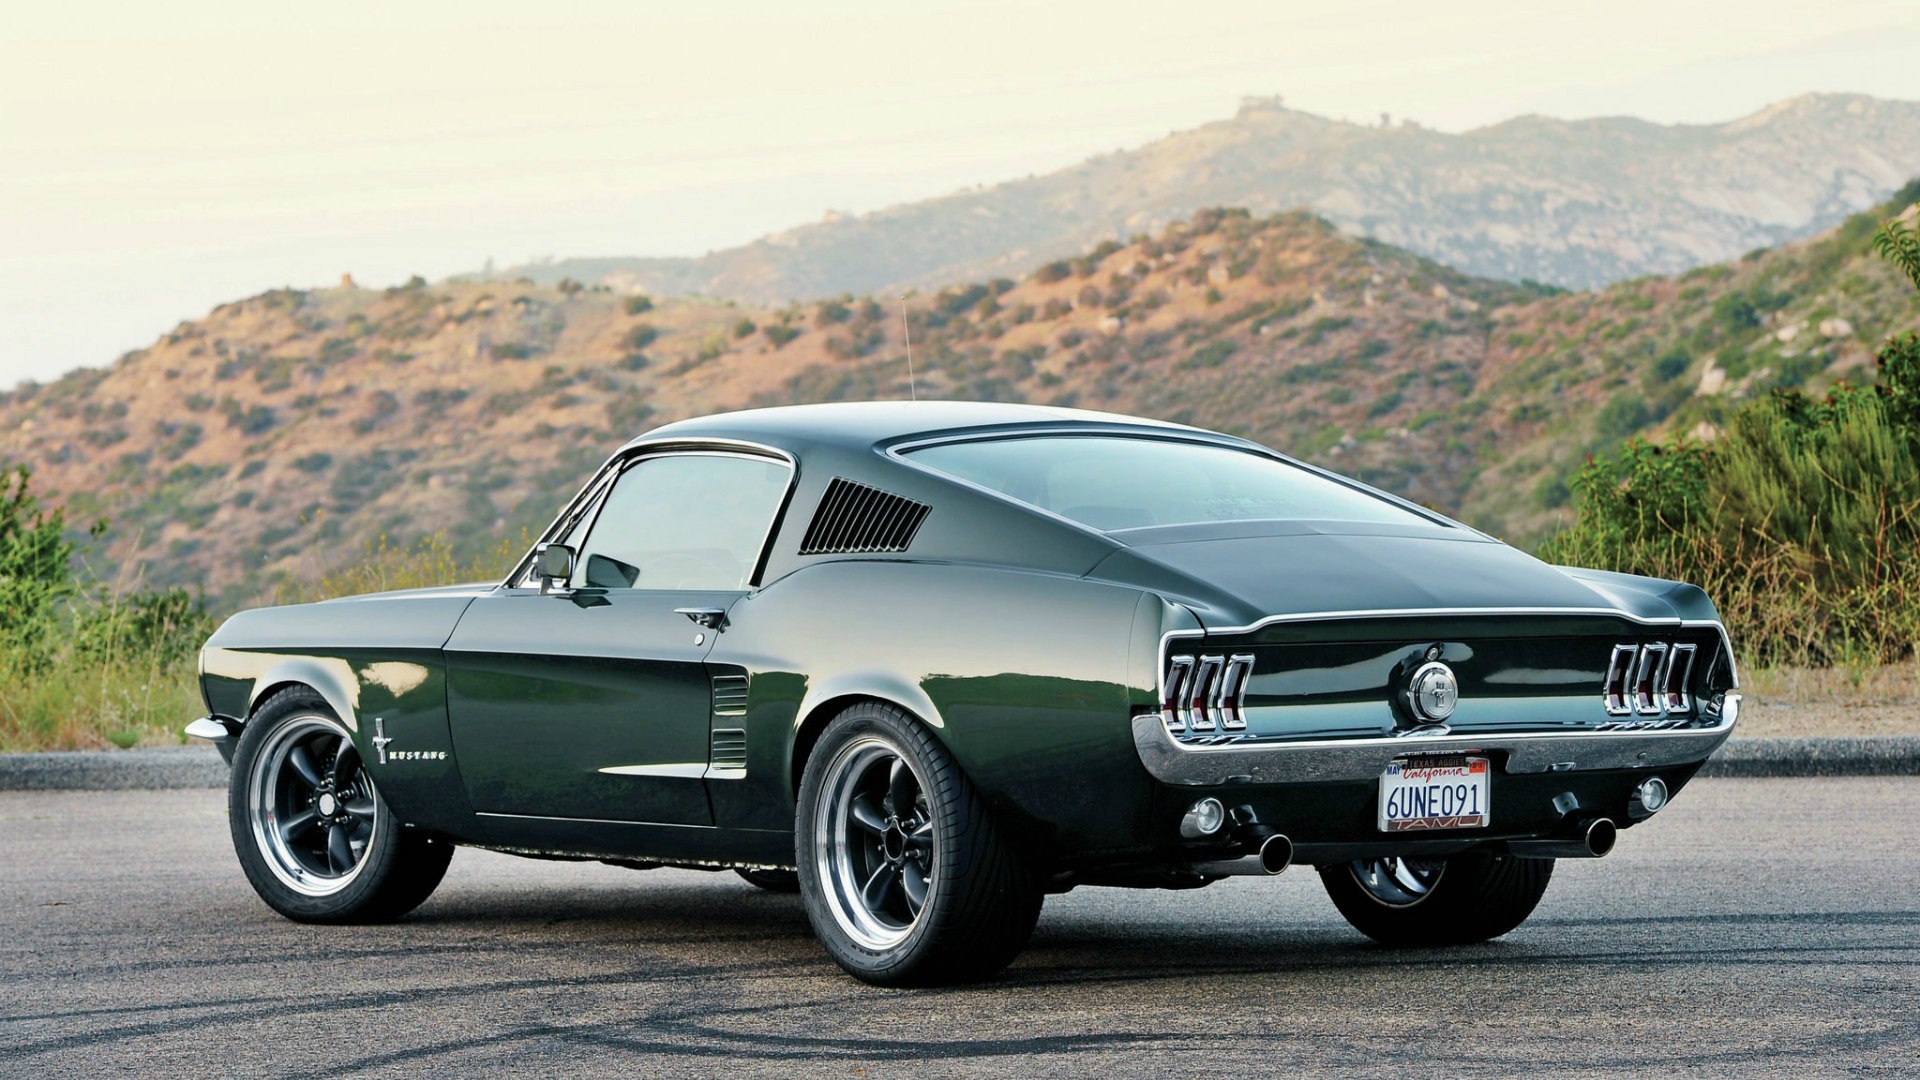 Ford Mustang Fastback HD Wallpaper Background Image